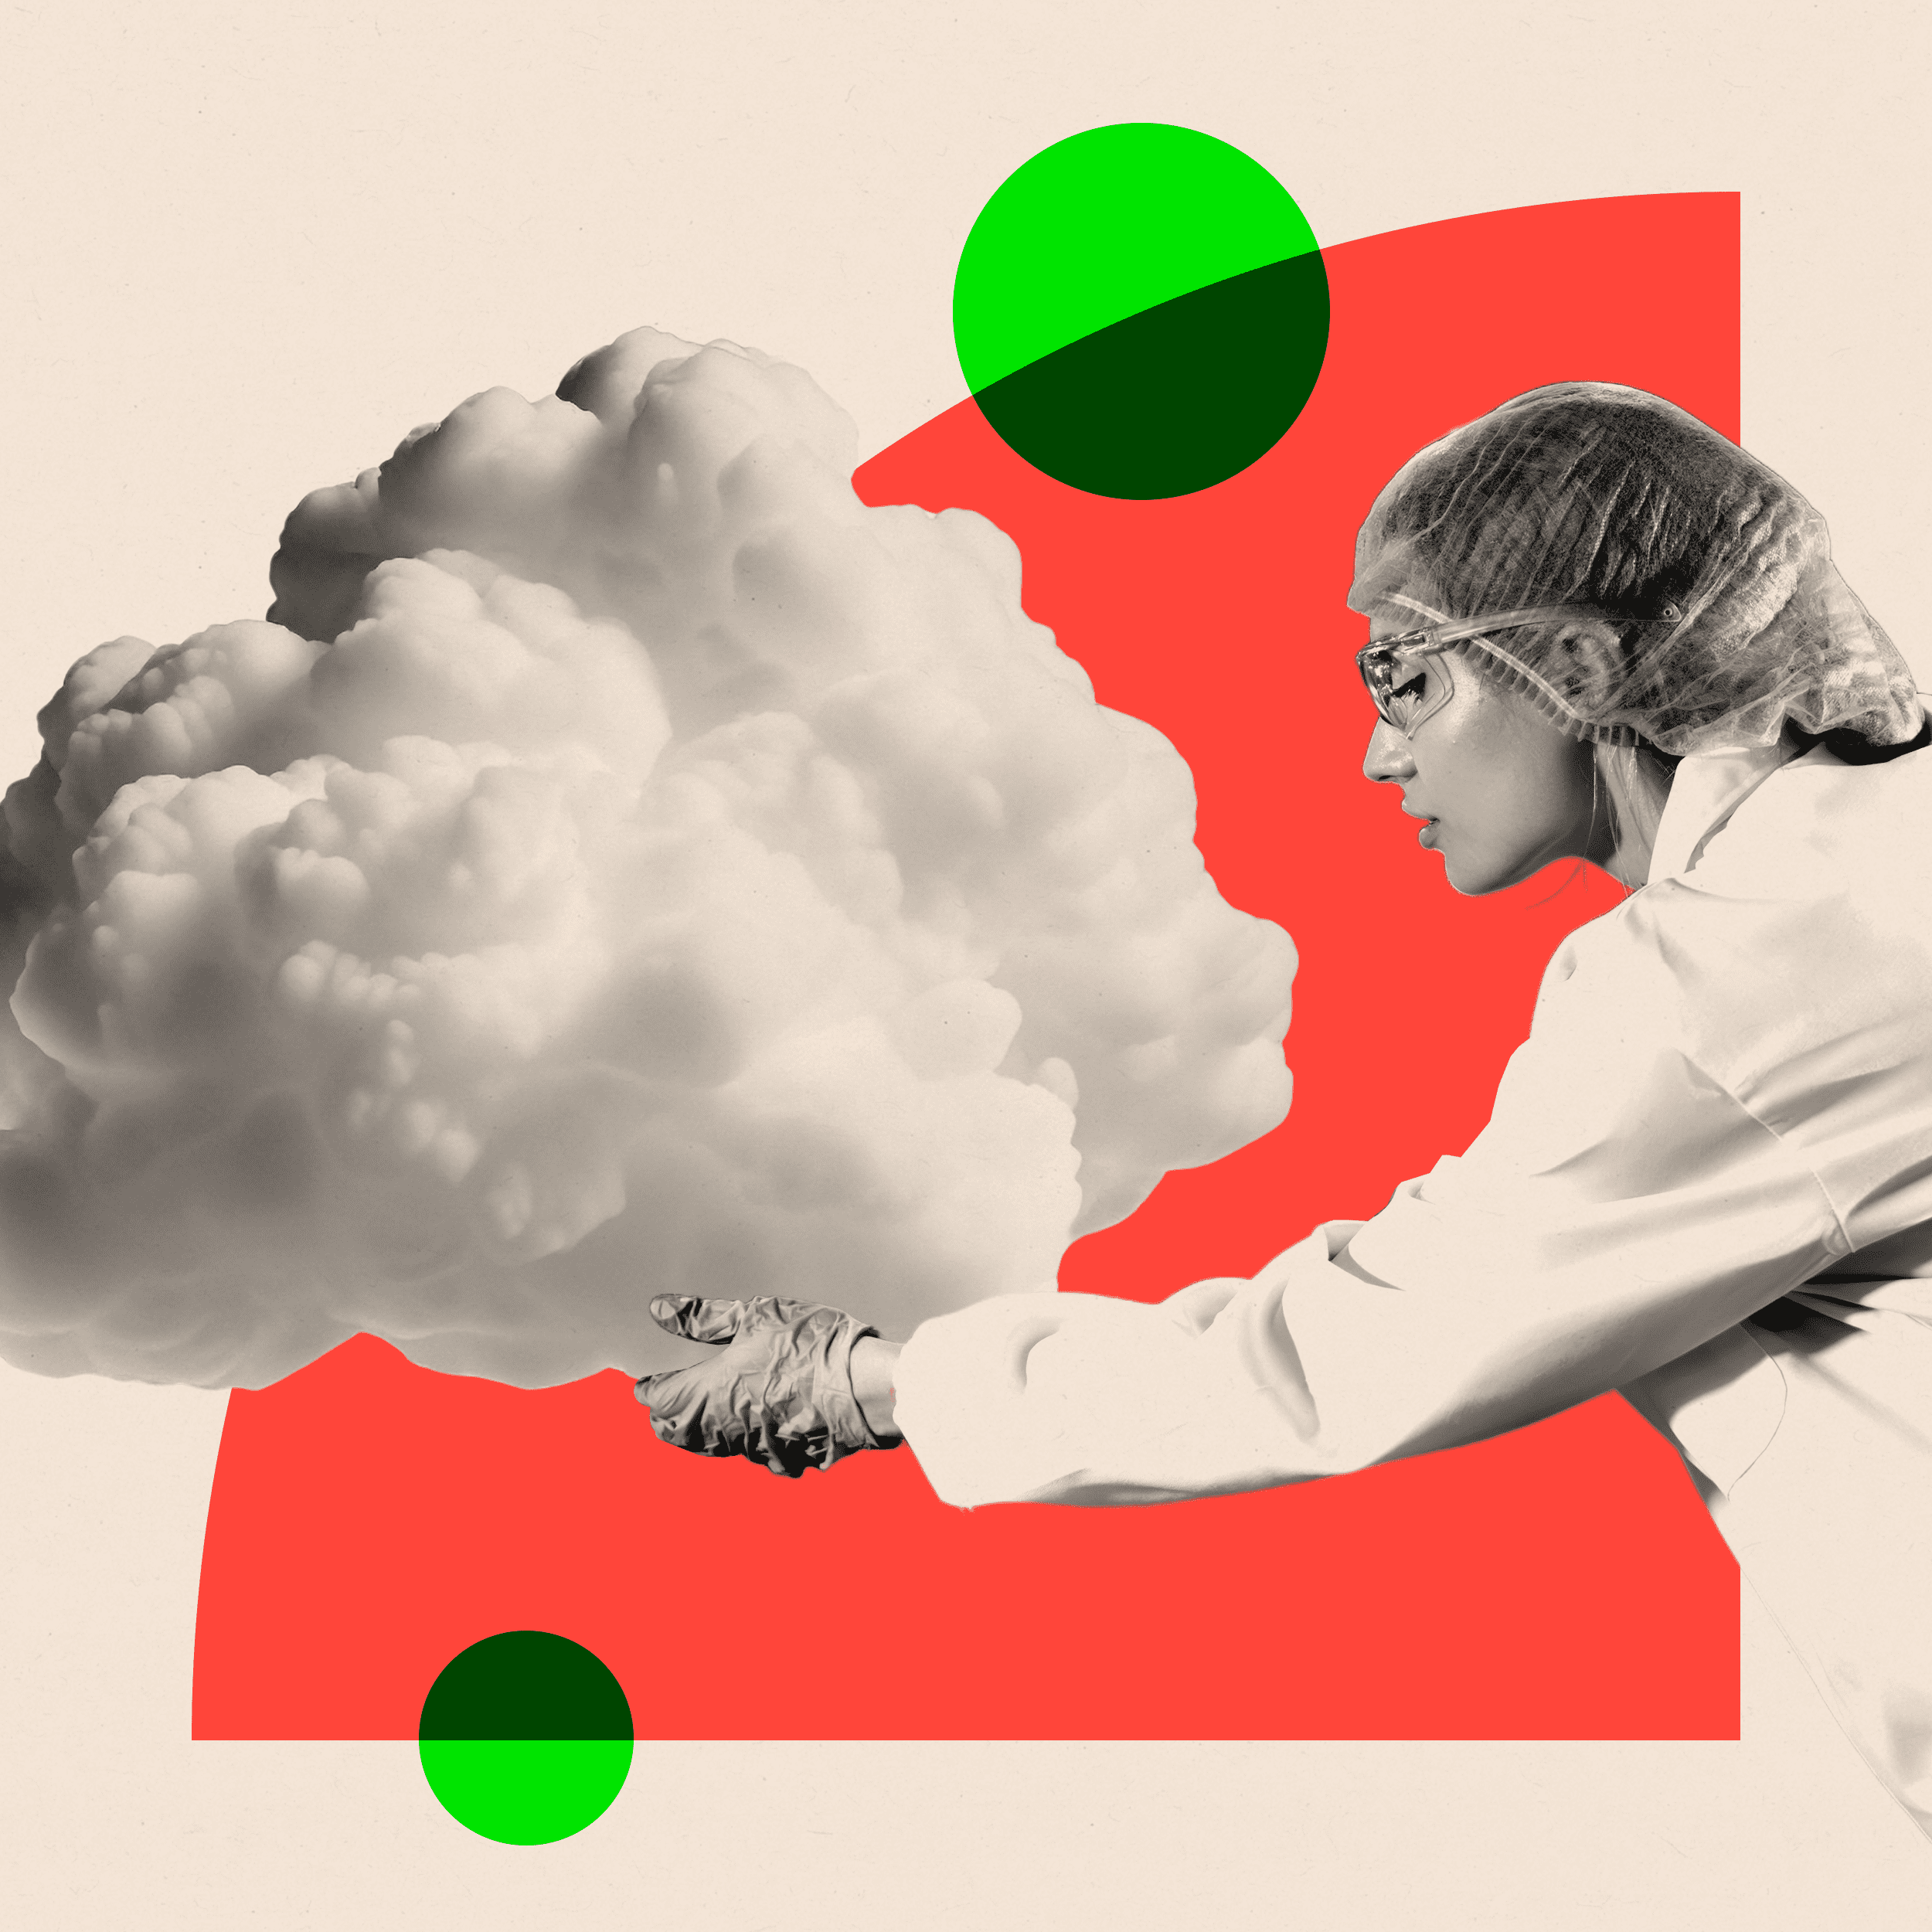 Geo-engineering is subject to conspiracy theories, but could it help save the planet?